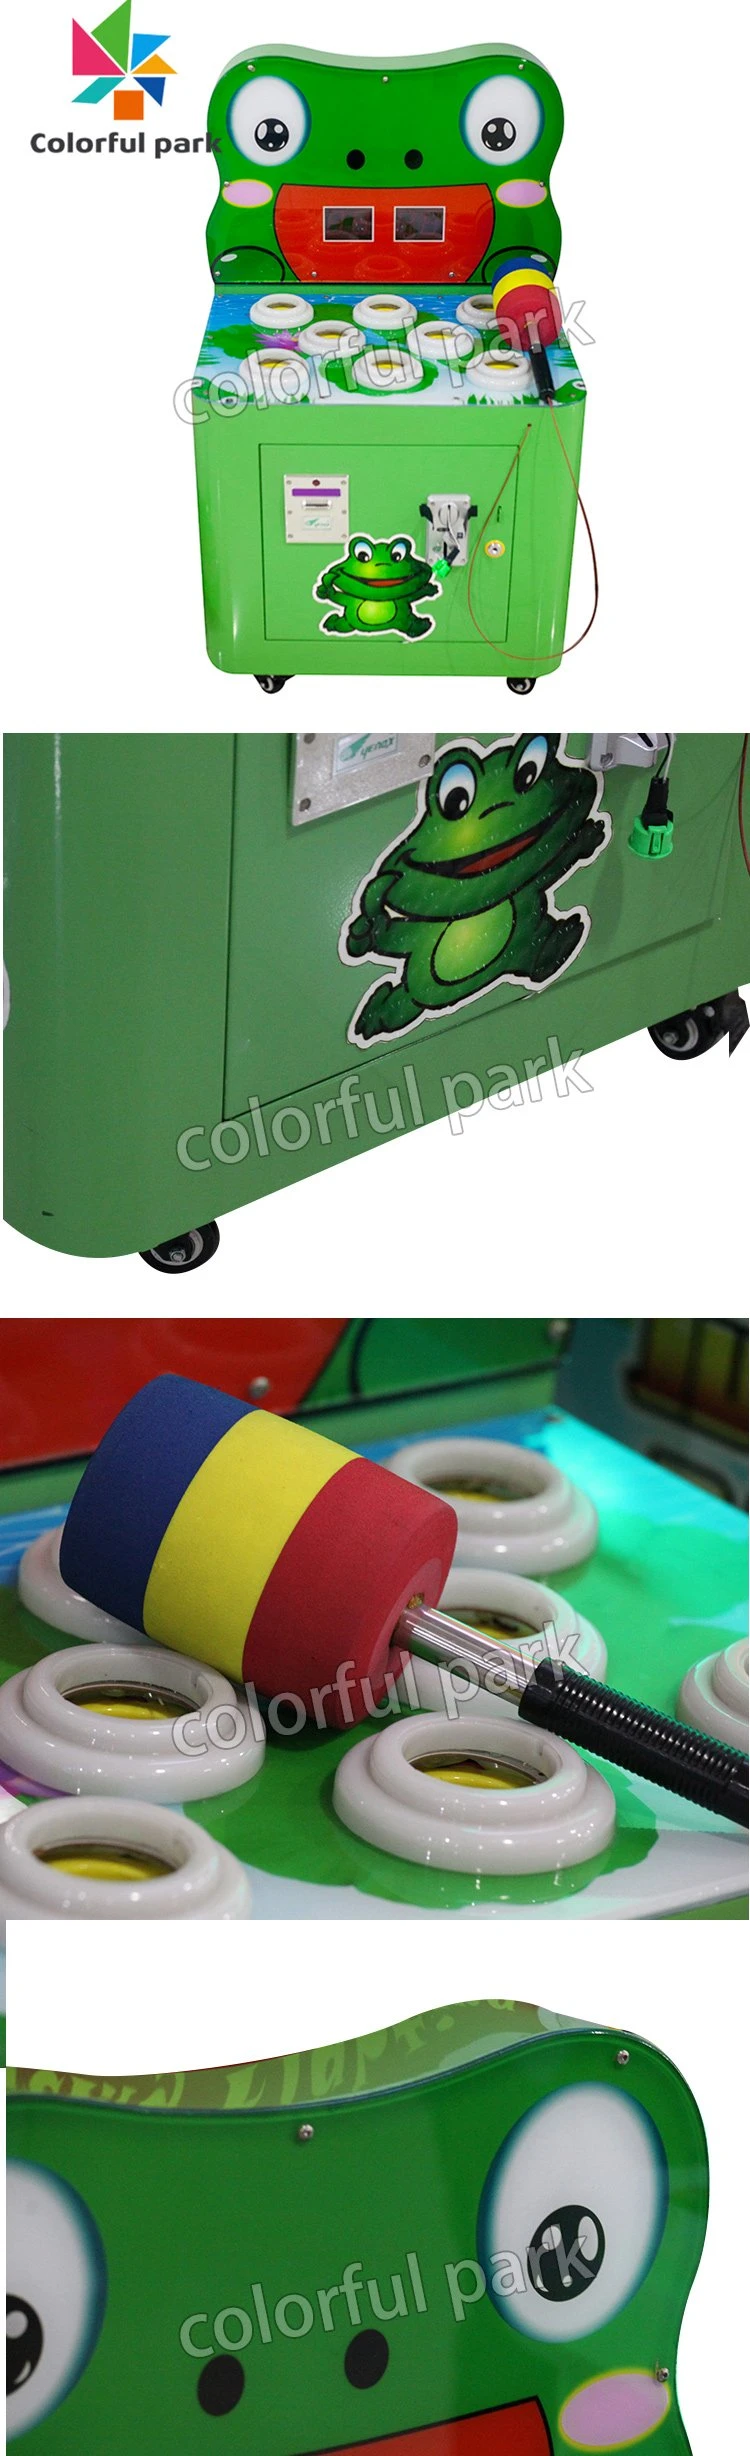 Colorful Park Coin Operated Children Games Kids Hammer Hit Frog Arcade Game Machine